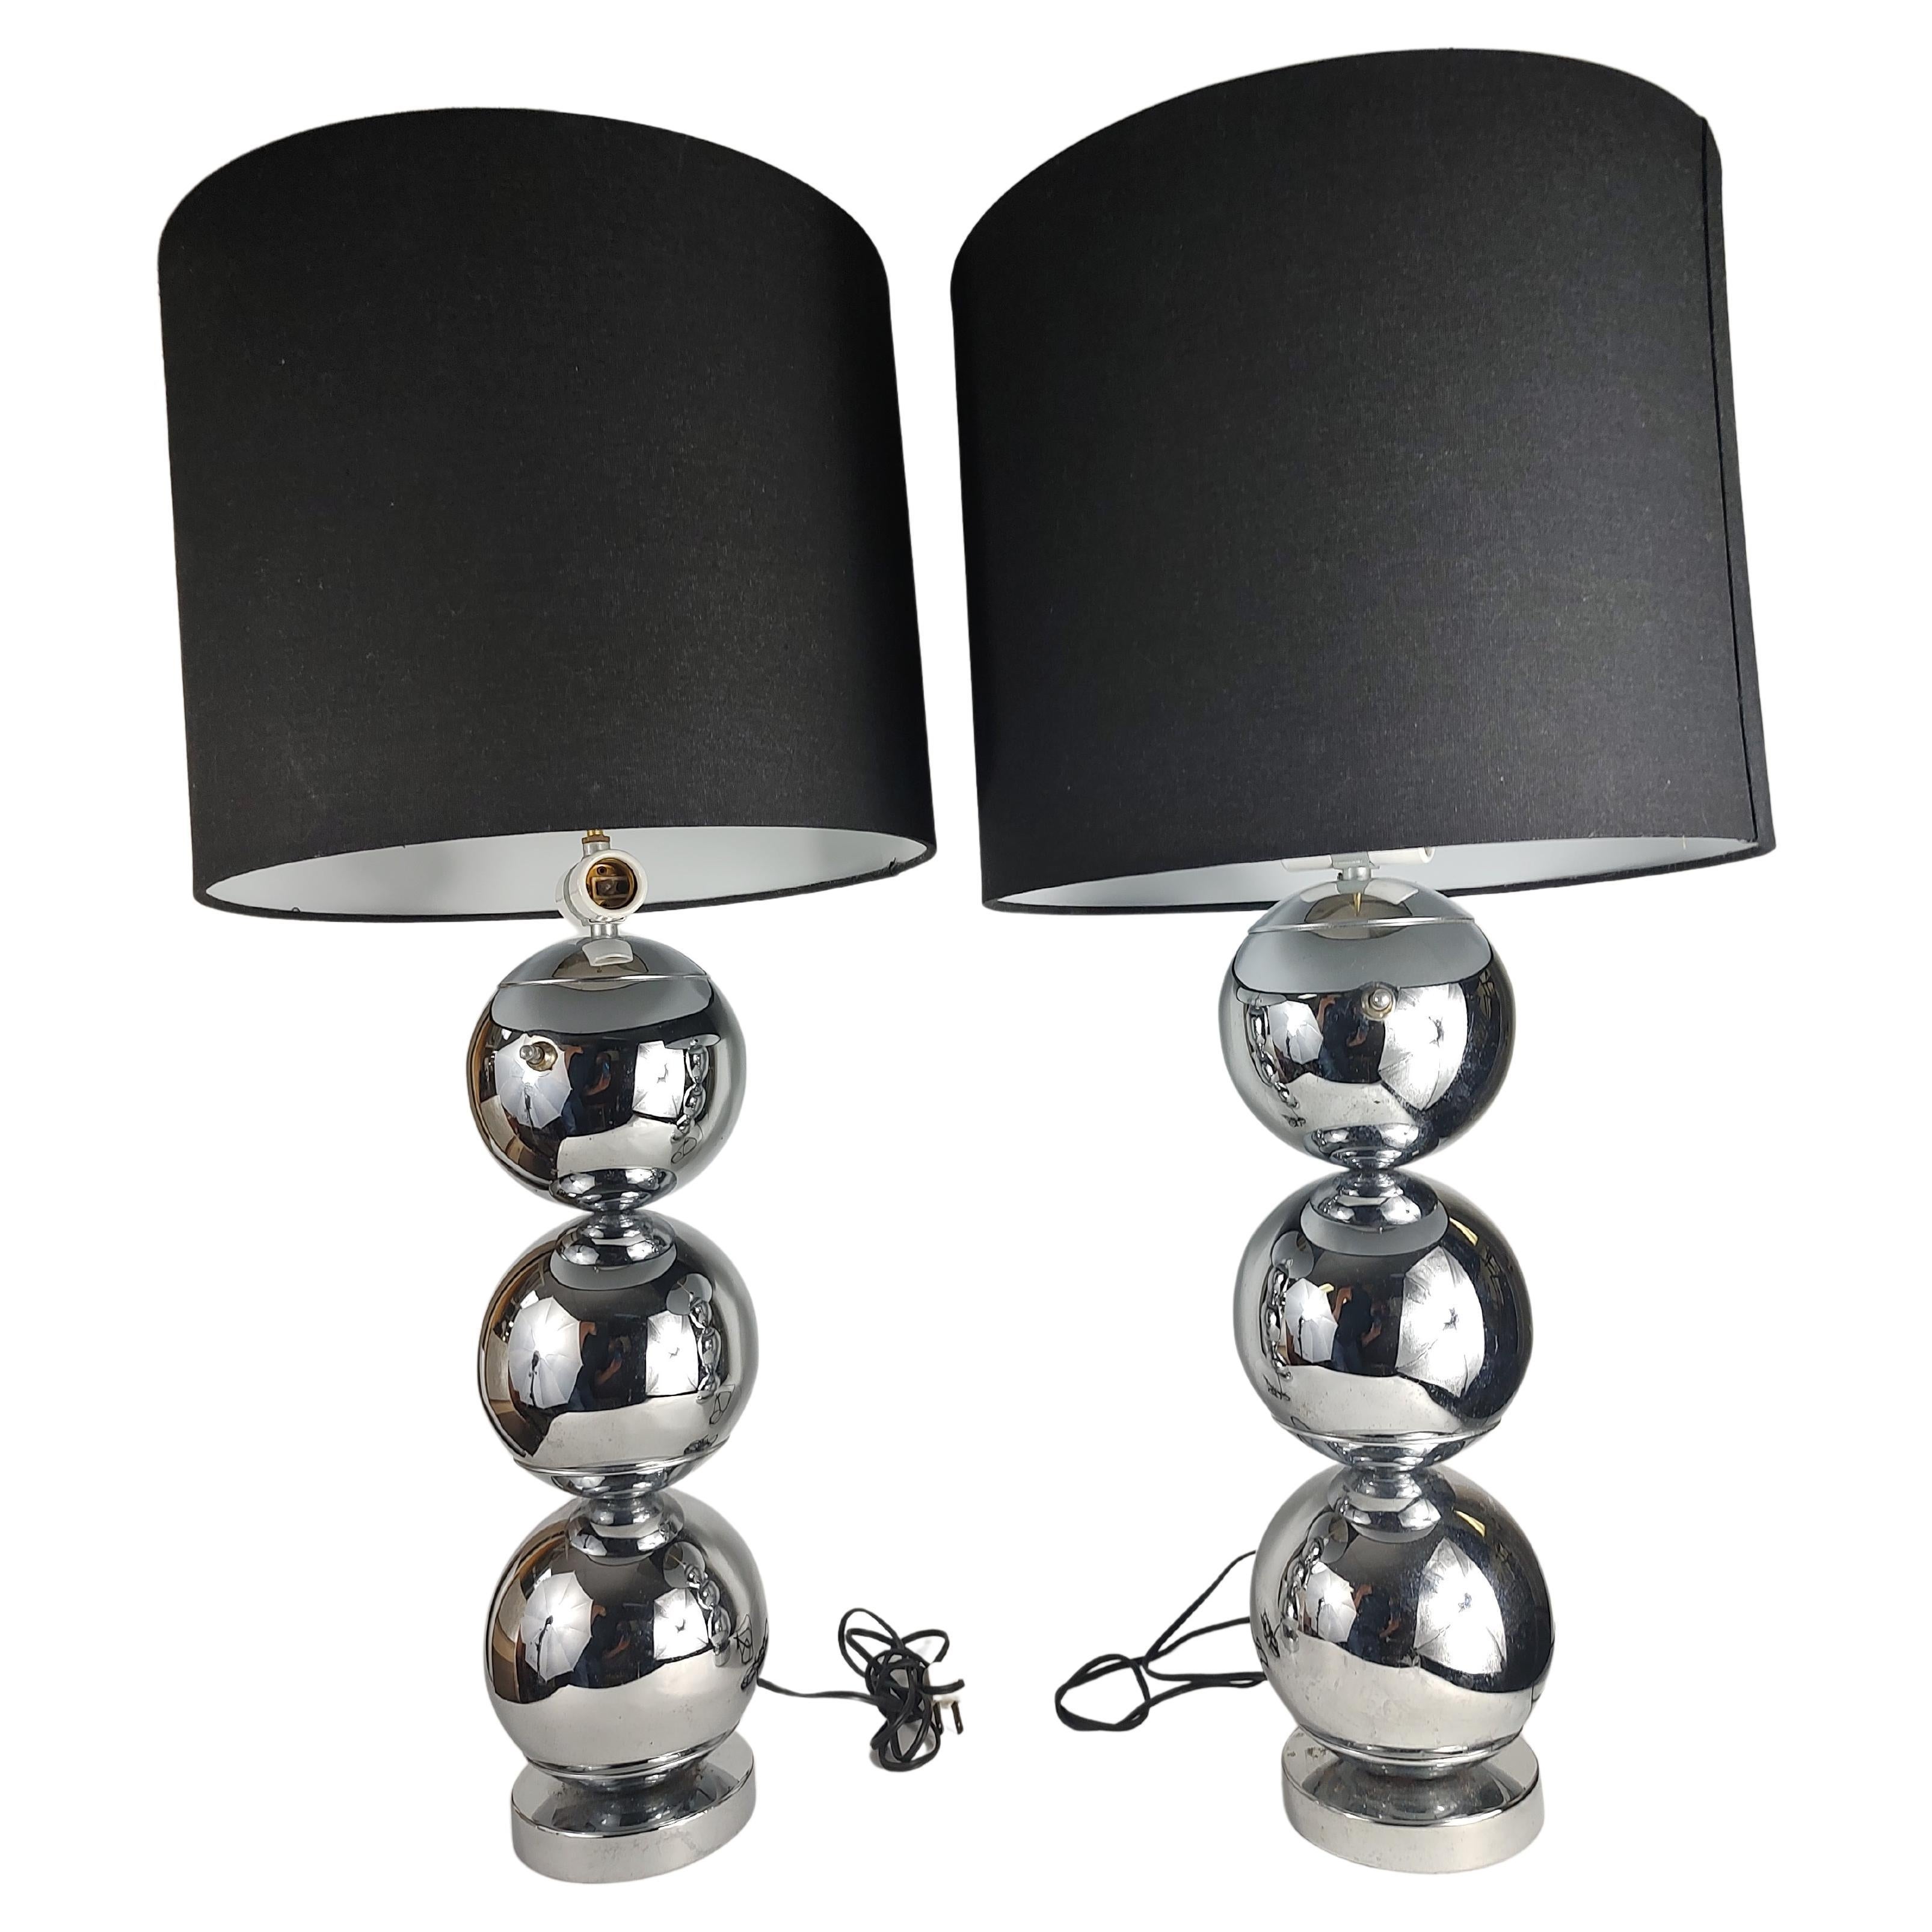 Fabulous high quality pair of stacked ball, which are literally true stacked balls since they are all separate pieces from one another. Good weight and in very good vintage condition. Restoration hardware shades in black. Shades are 15.5 x 13H
Lamp